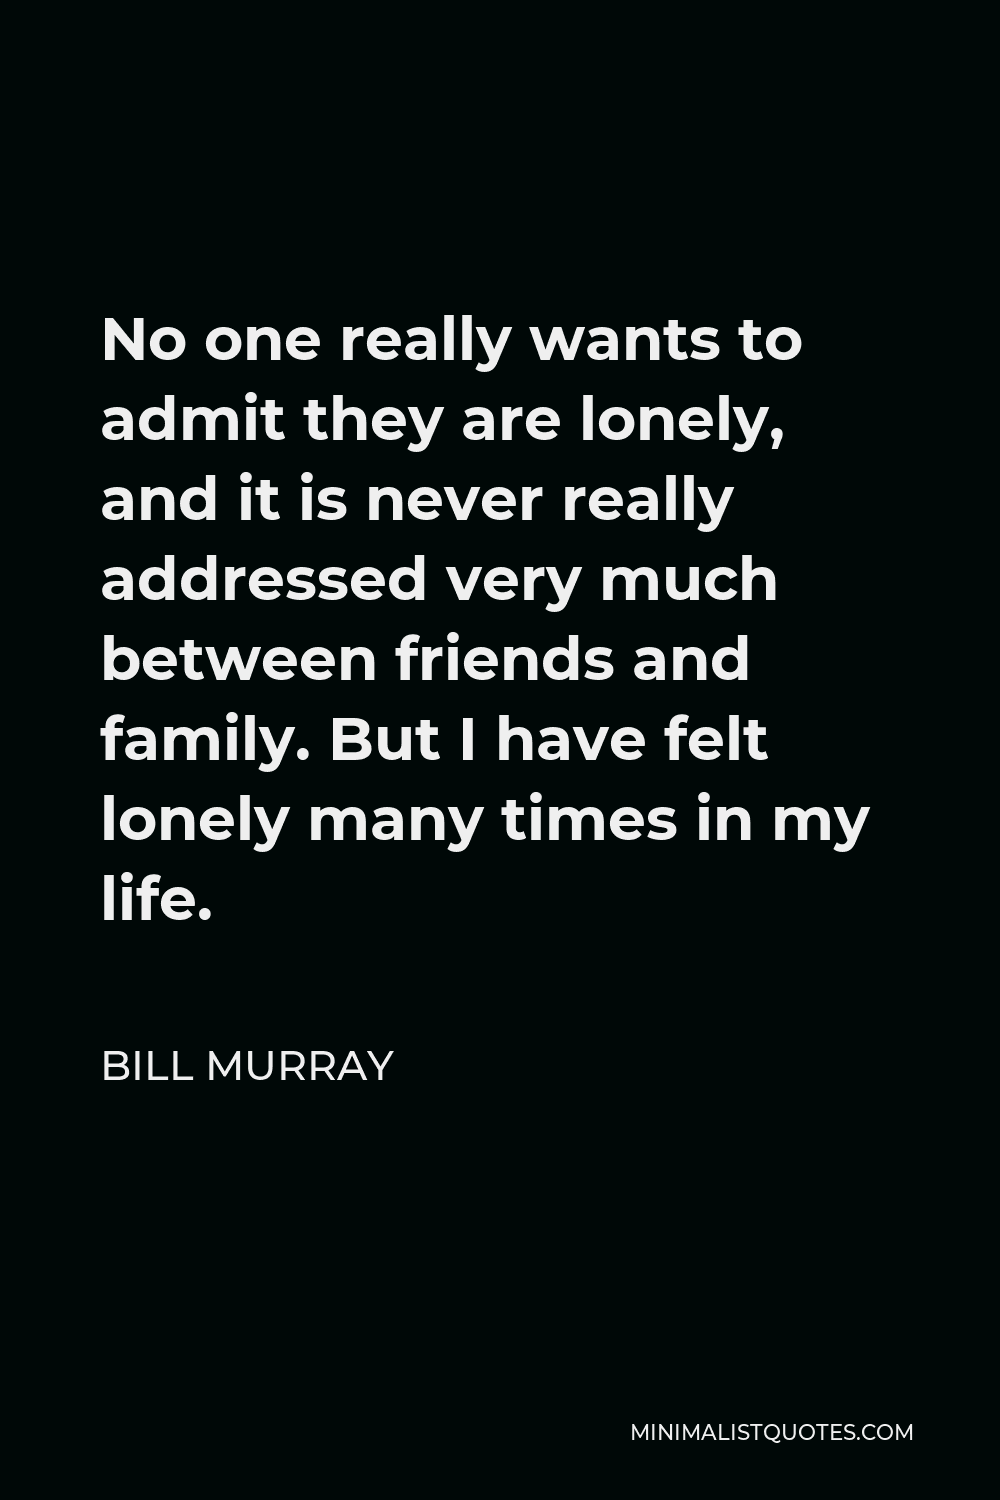 Bill Murray Quote - No one really wants to admit they are lonely, and it is never really addressed very much between friends and family. But I have felt lonely many times in my life.